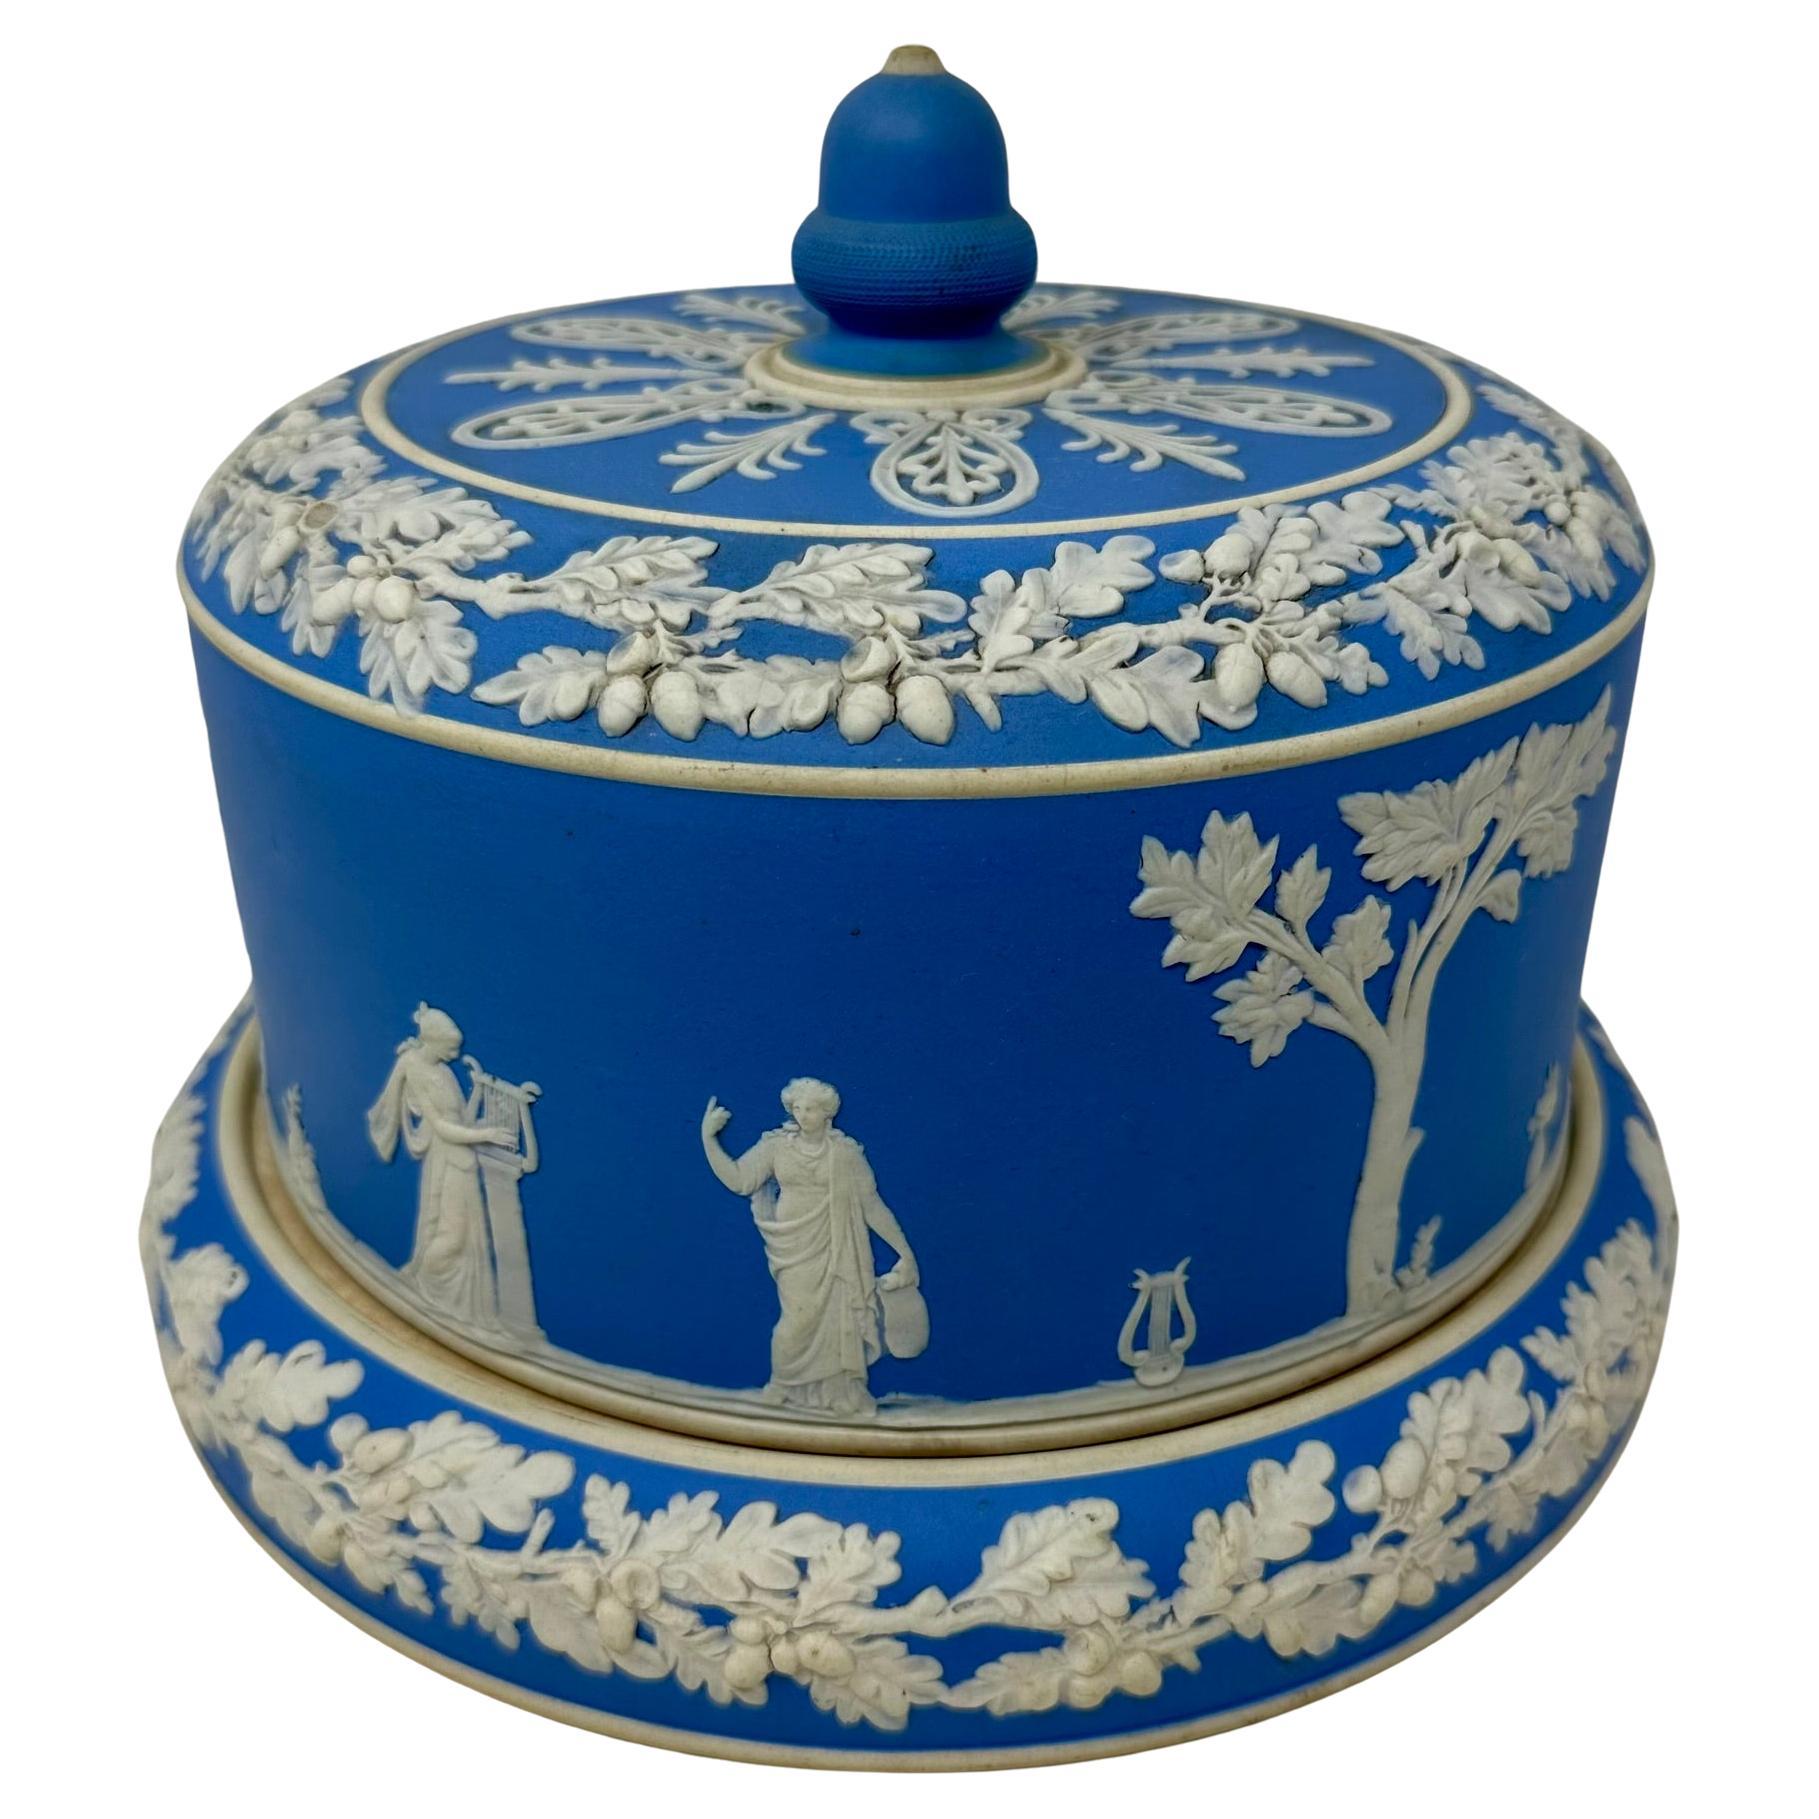 Antique Wedgwood Jasperware Porcelain Cheese Dome and Cover, Circa 1890-1910.